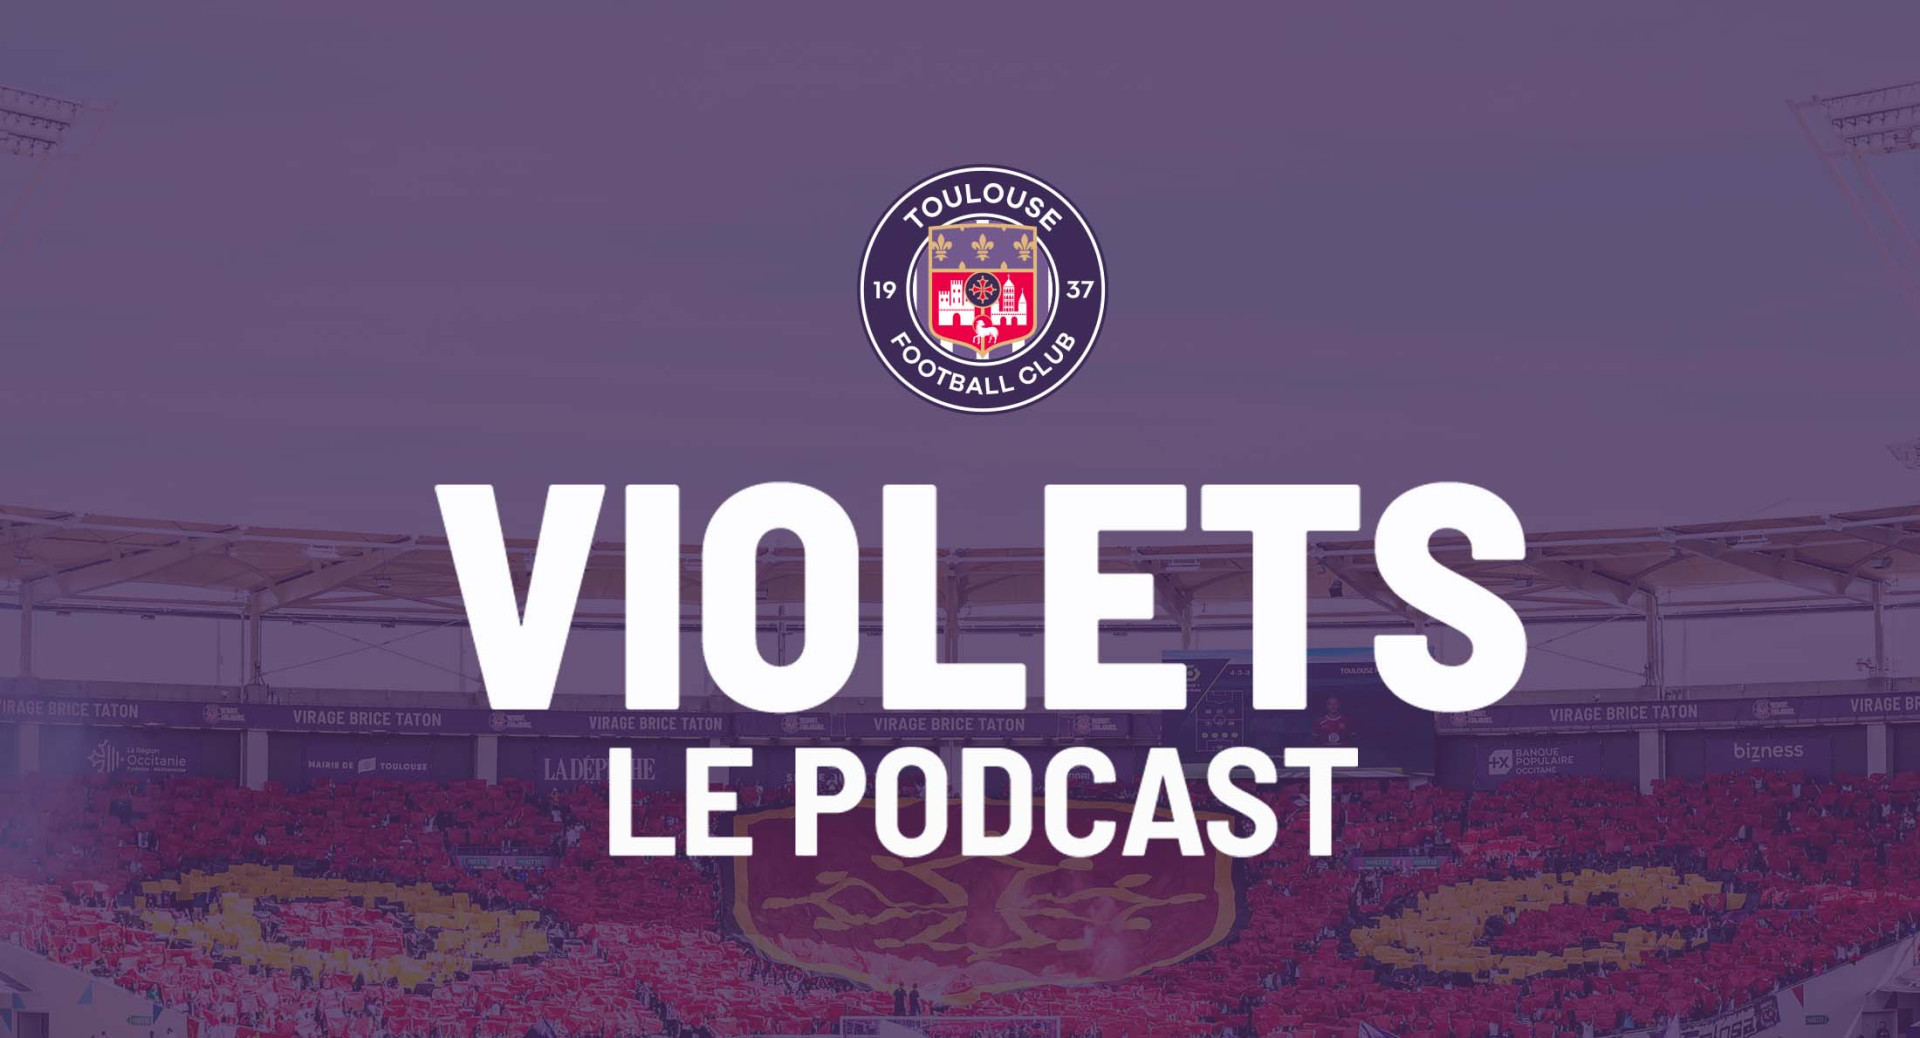 Toulouse Football Club (TFC) - song and lyrics by Thomas T